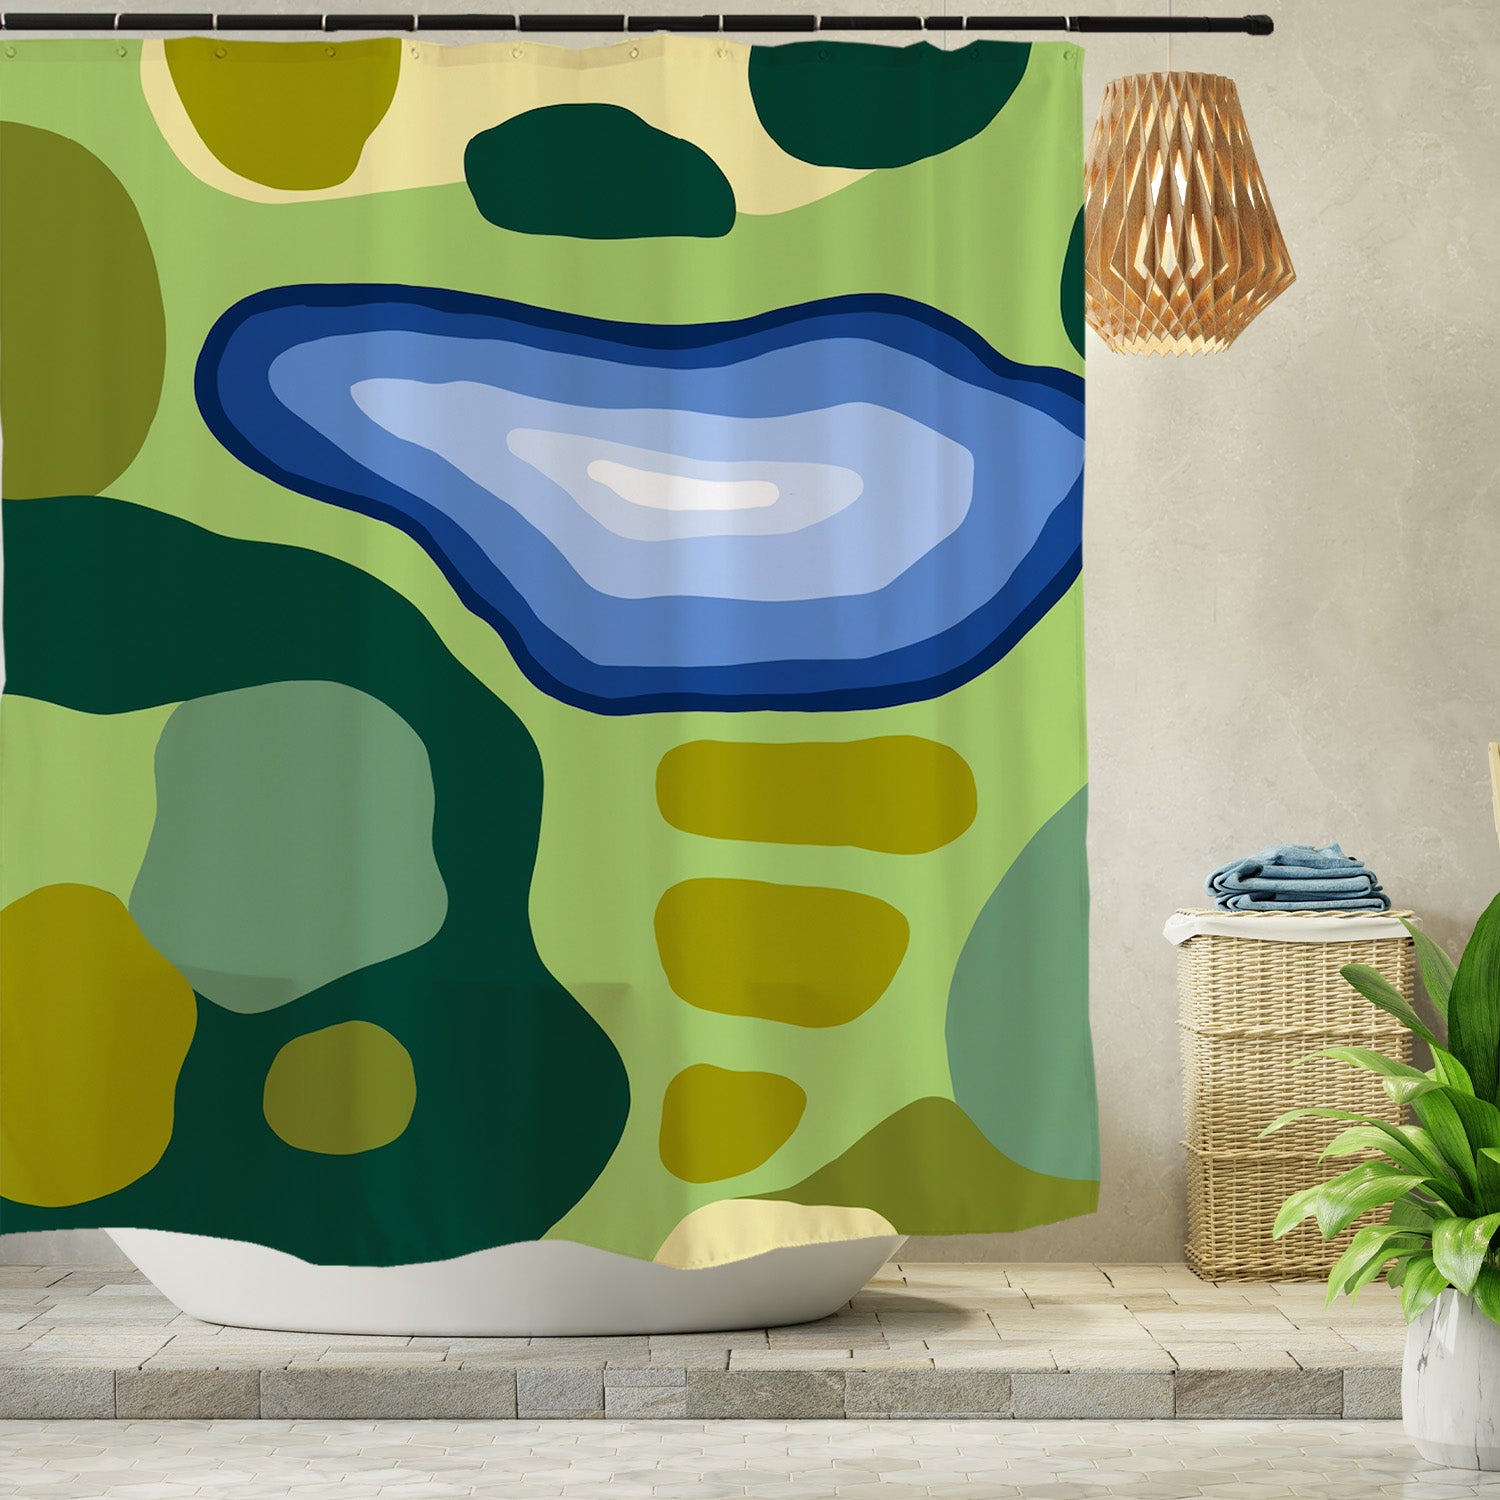 Feblilac Moss and Lake Shower Curtain with Hooks